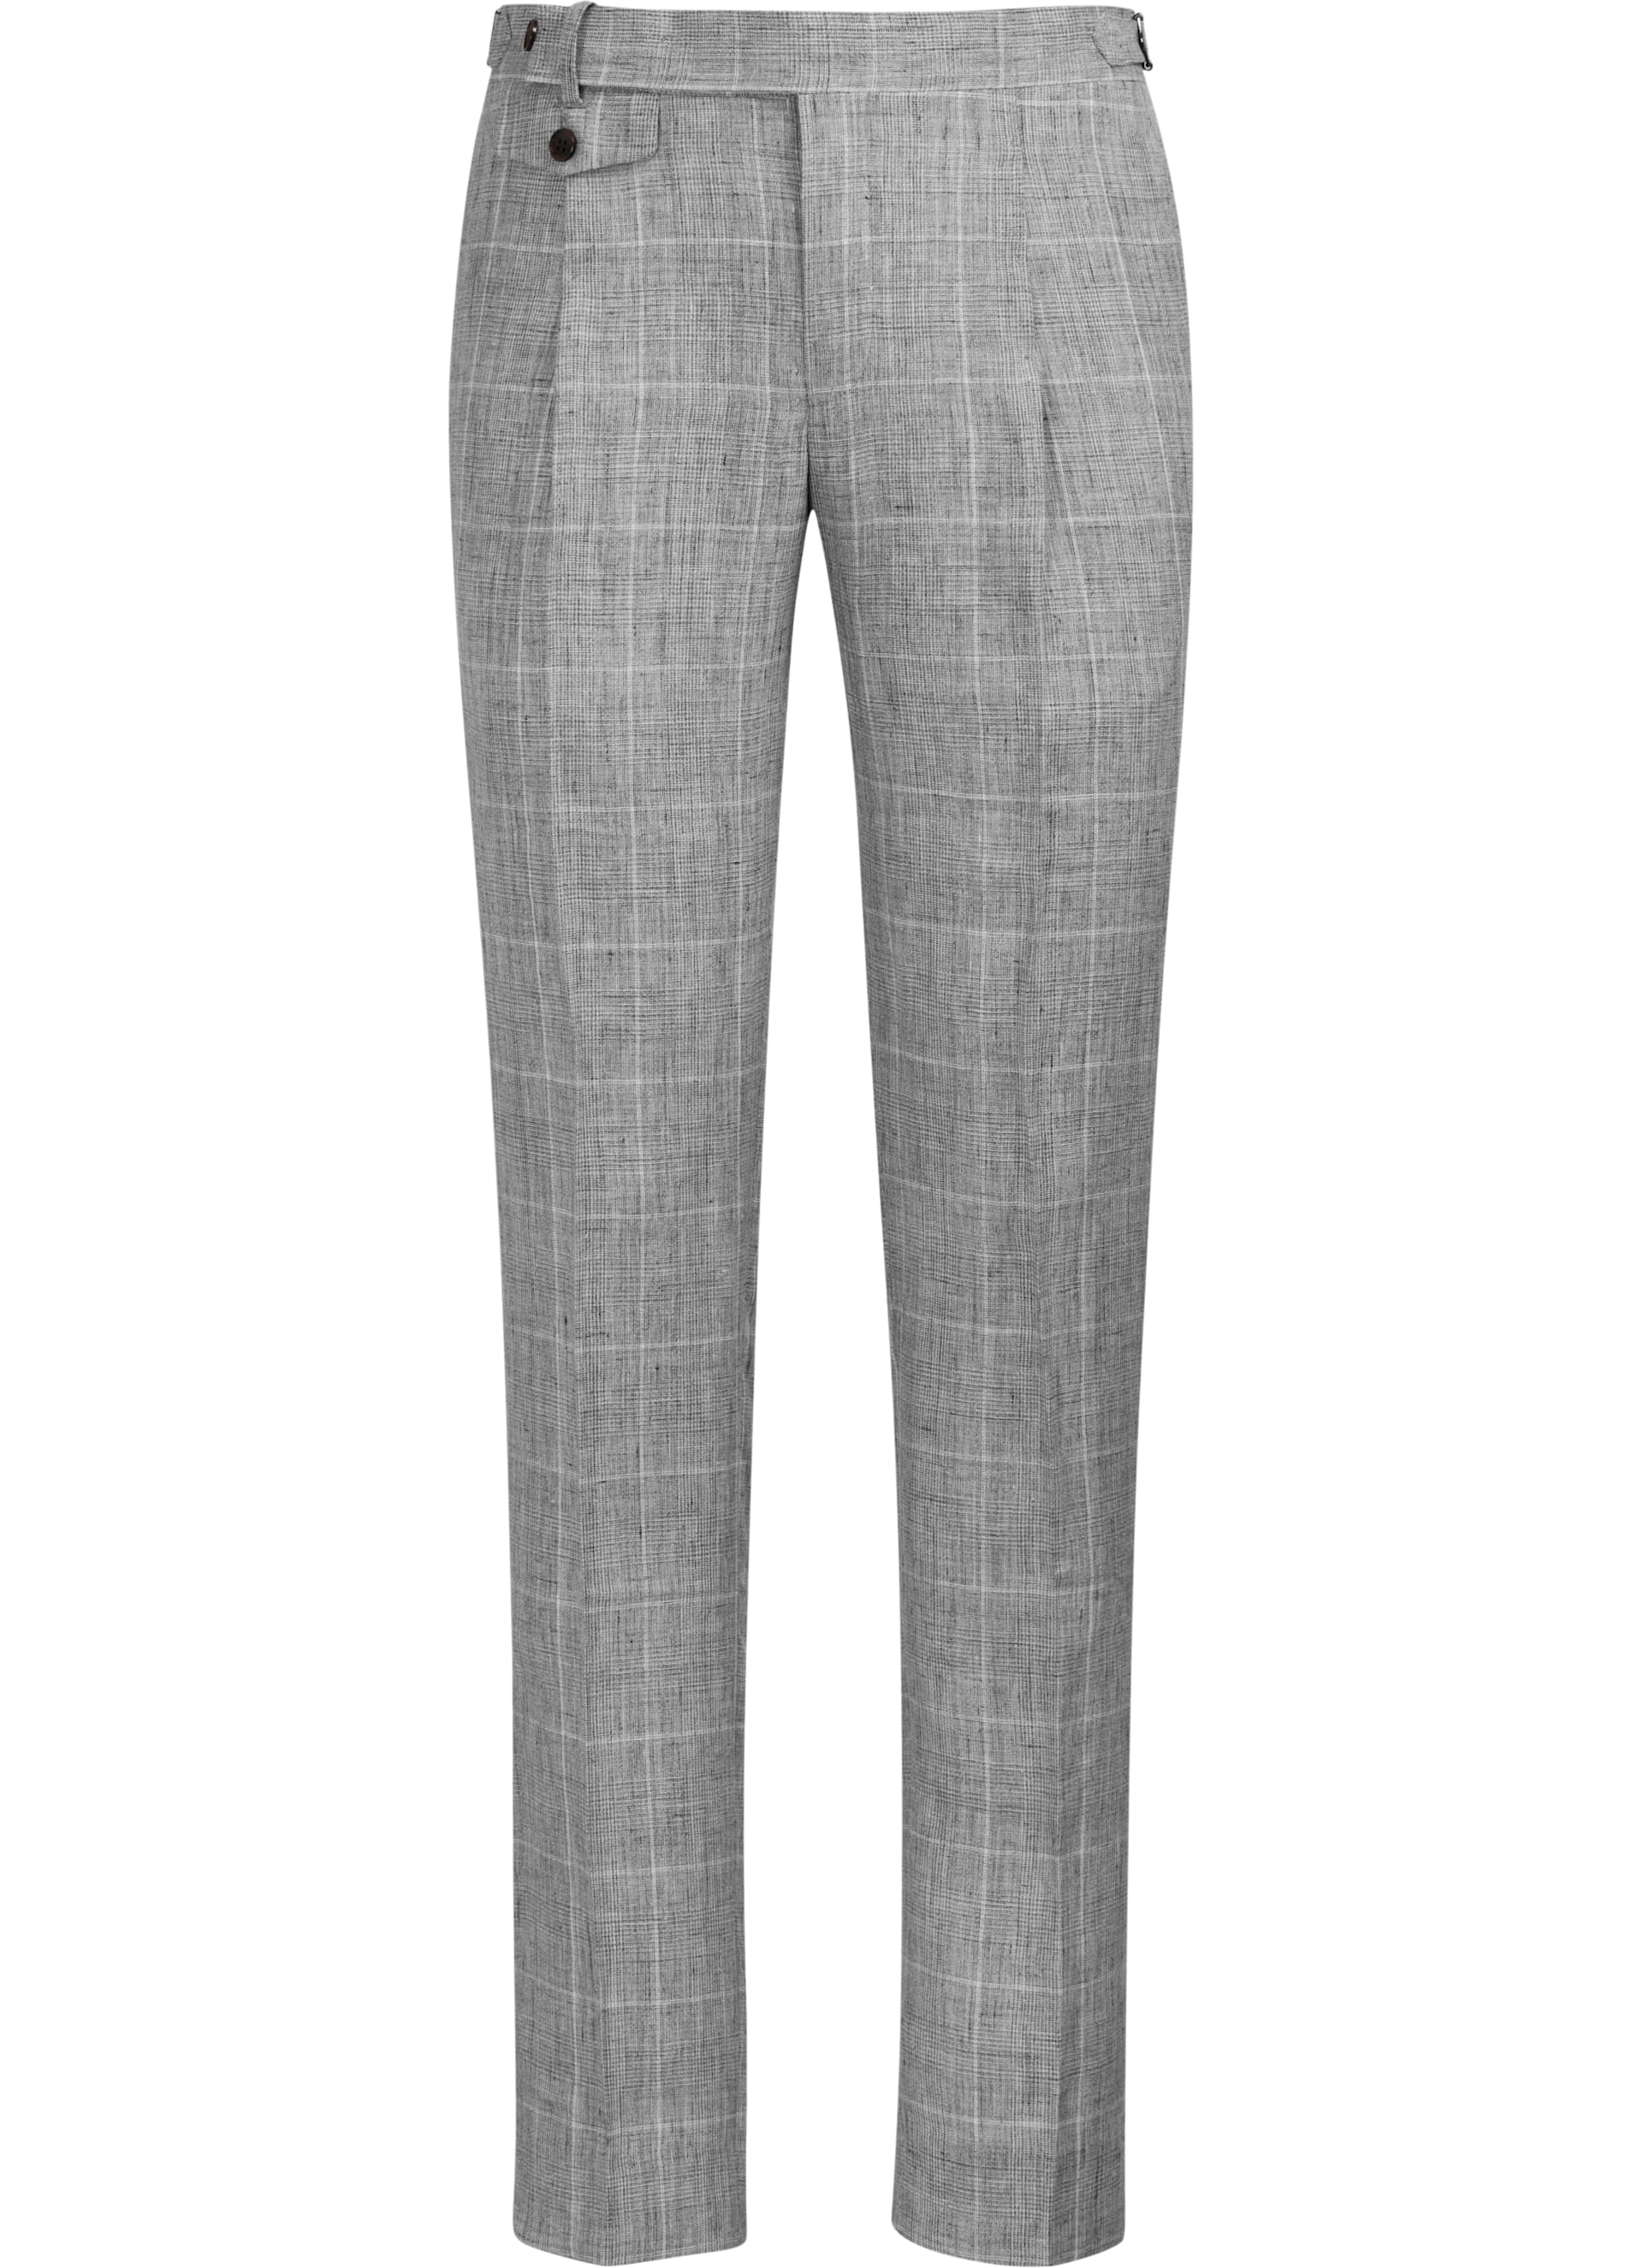 Light Grey Trousers B1001i | Suitsupply Online Store